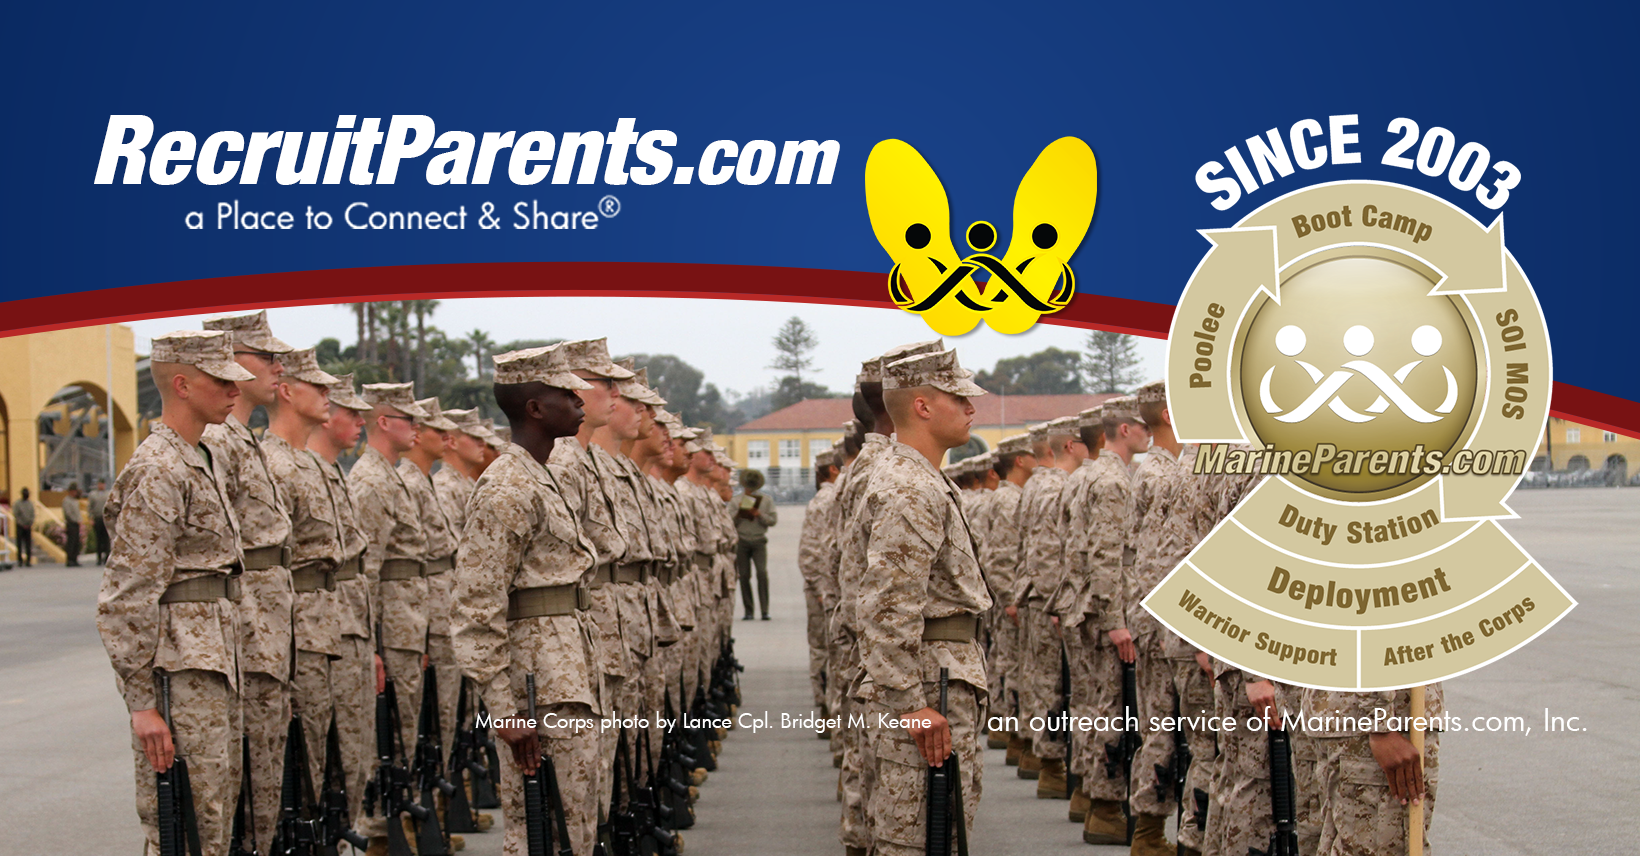 Official MarineParents.com Groups for Graduation on Facebook